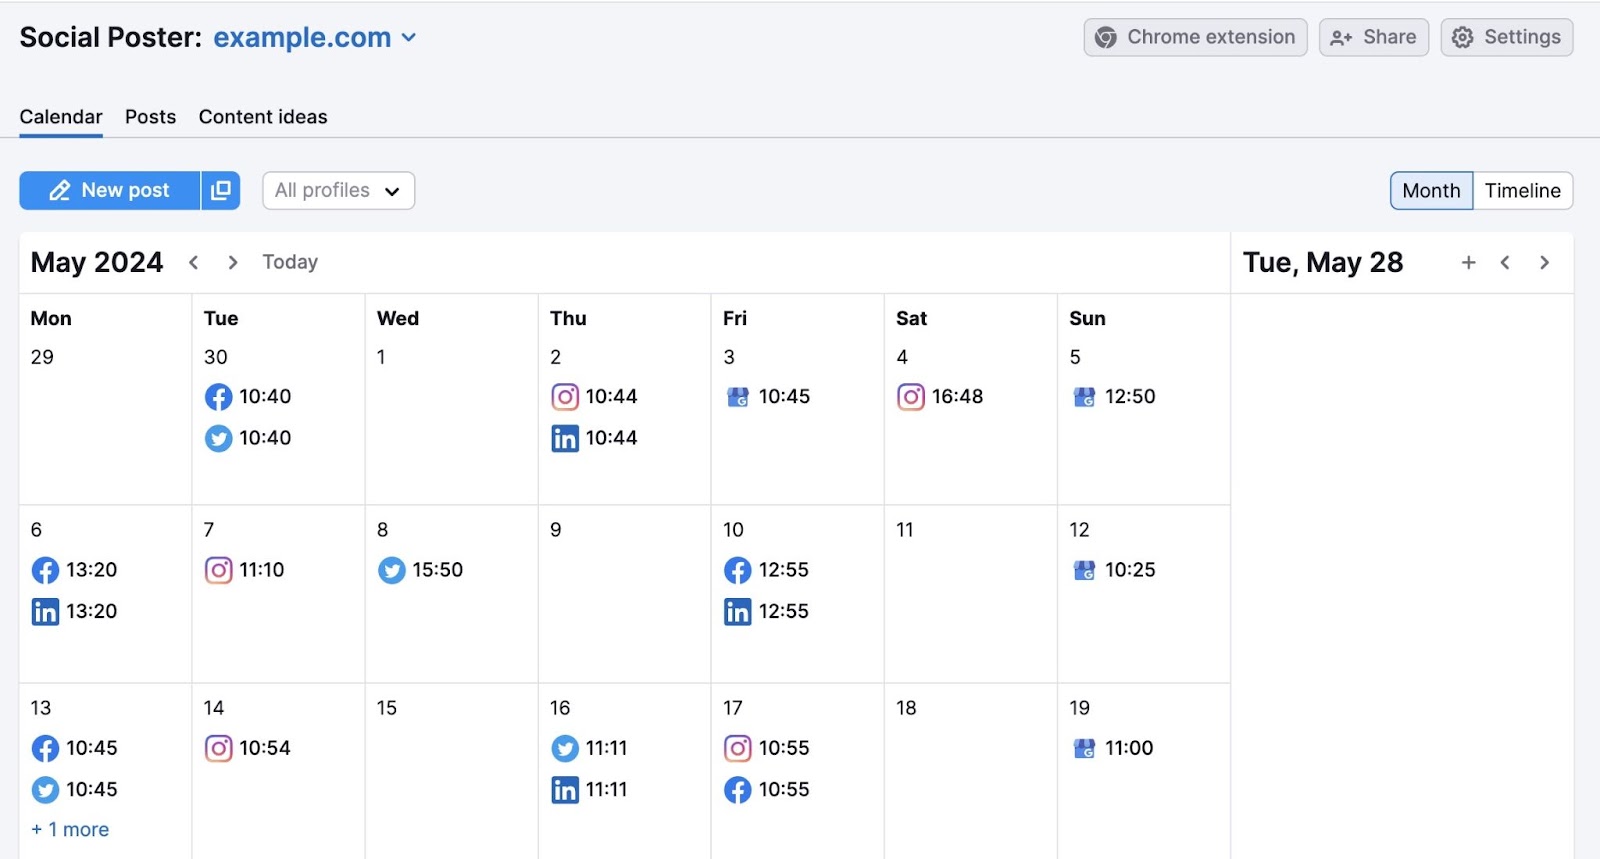 Semrush Social Poster tool showing a calendar with scheduled social media posts